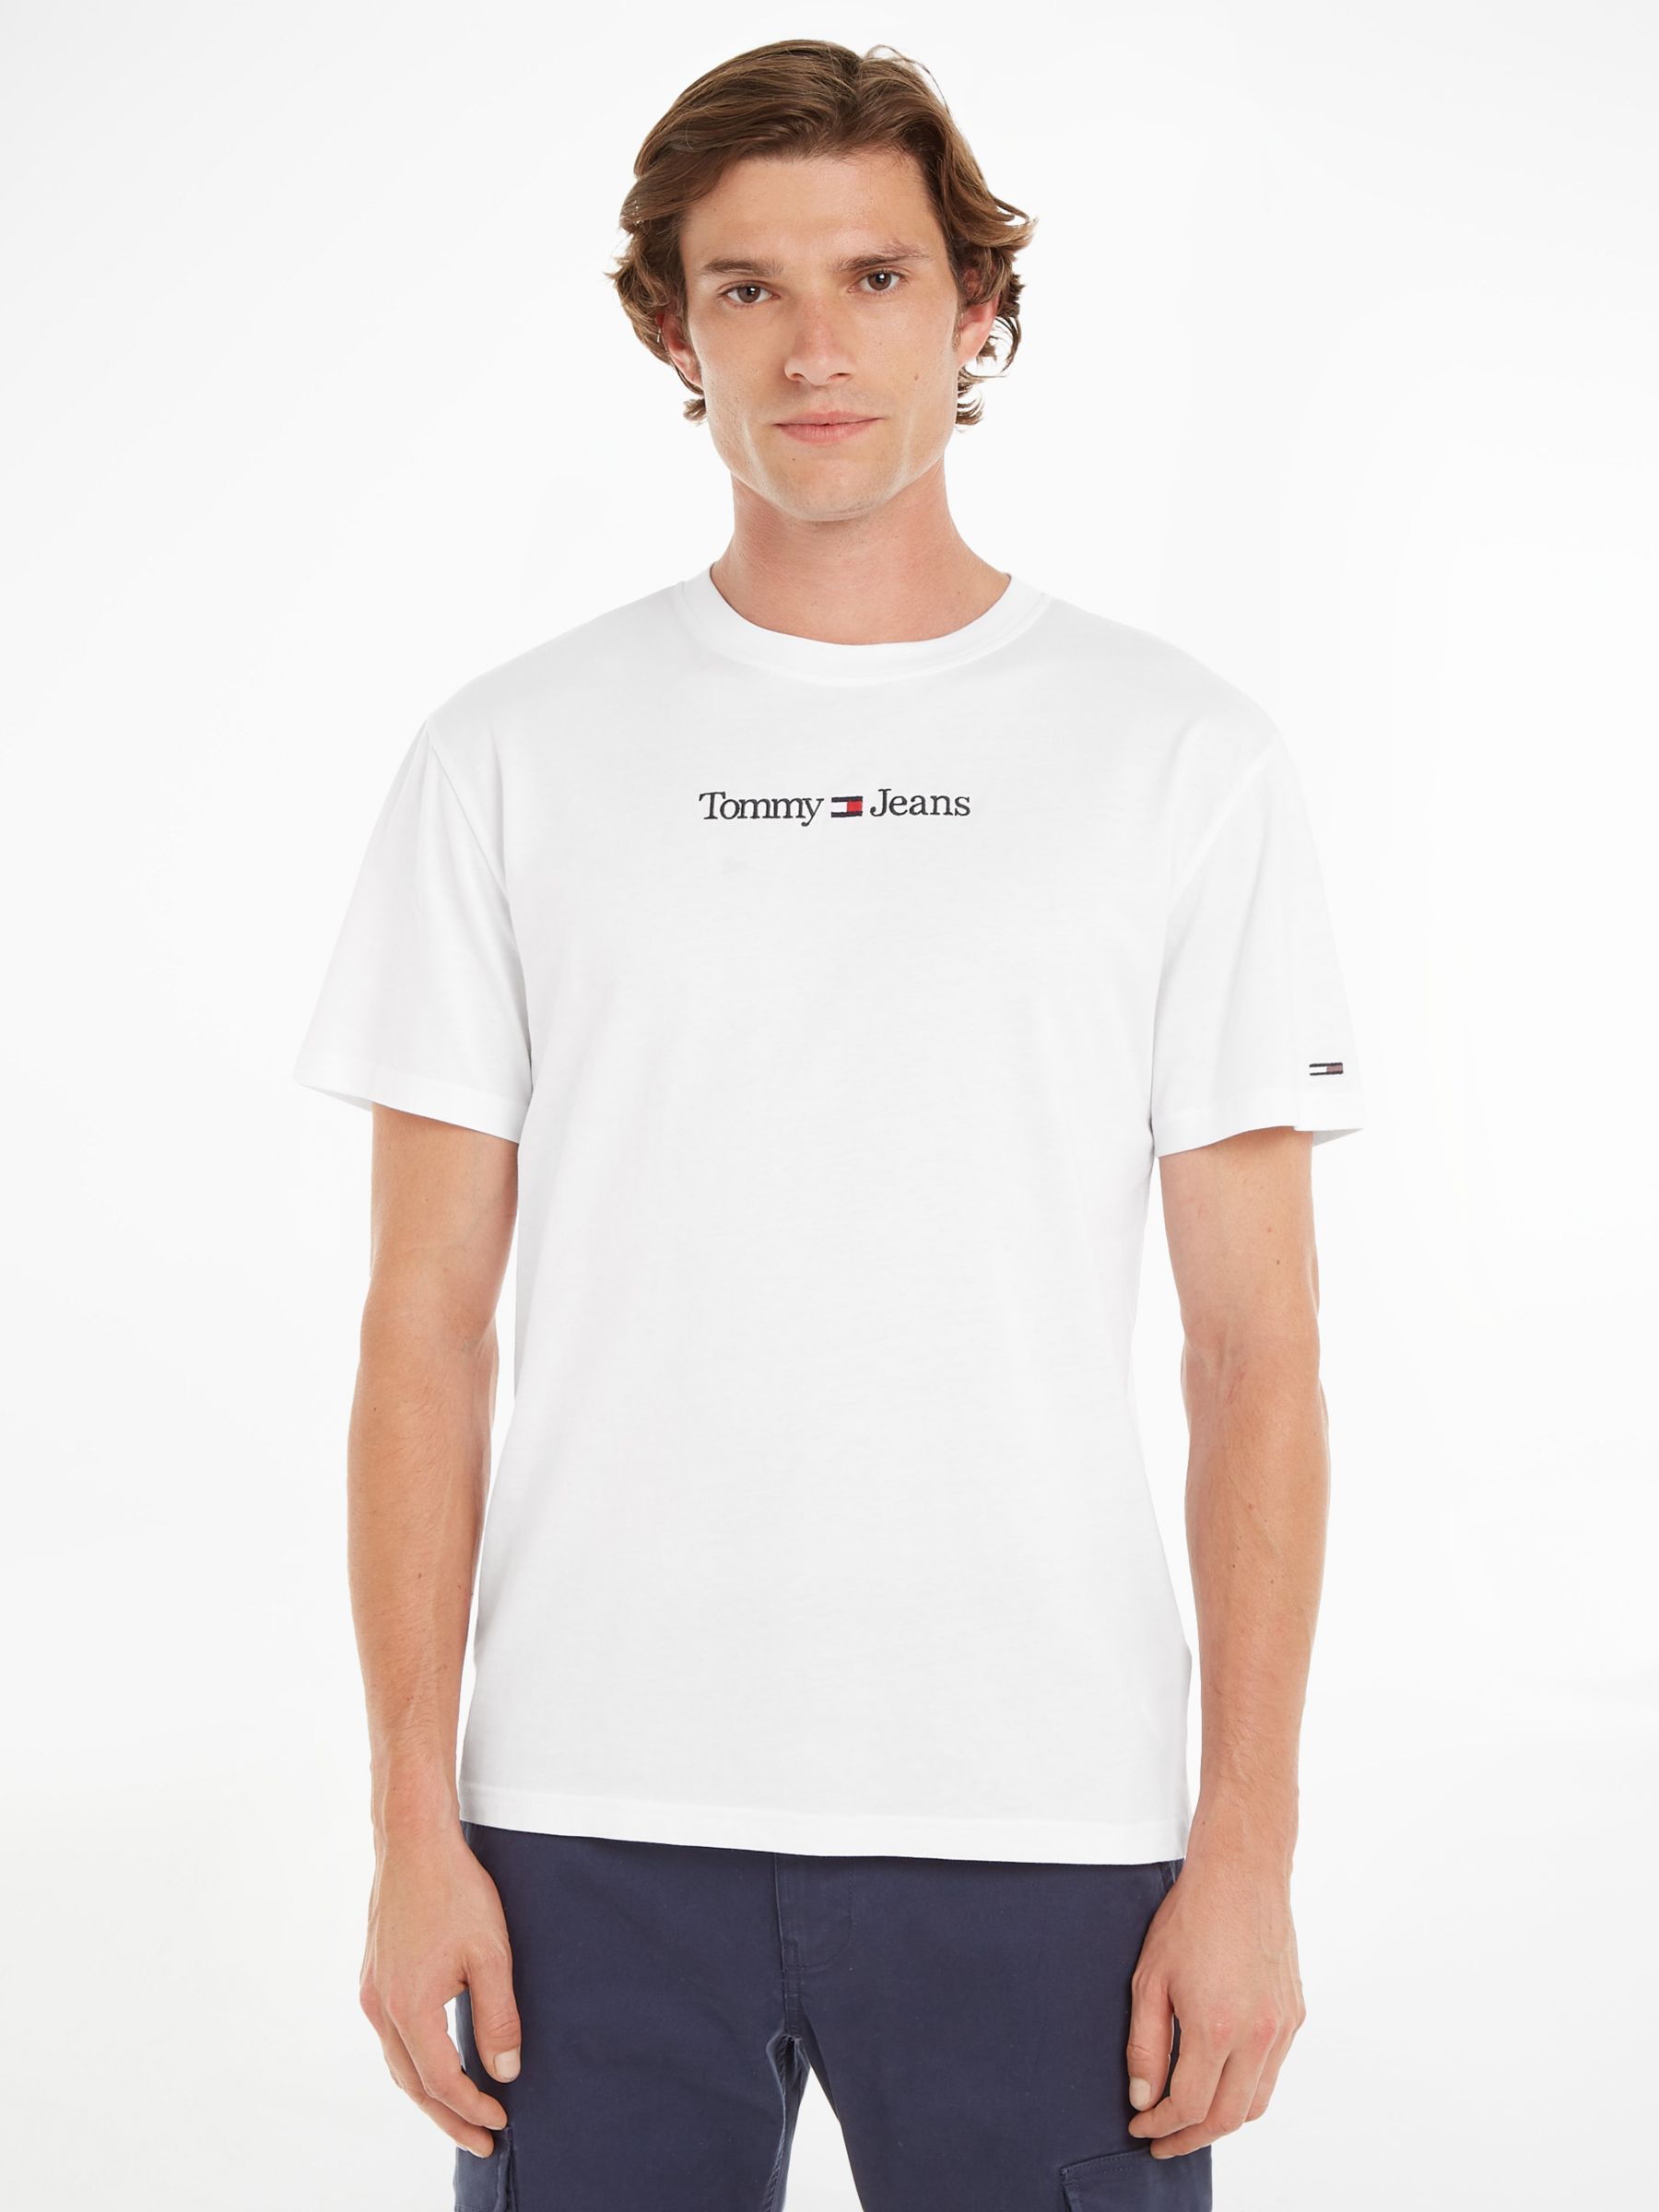 Tommy Jeans Classic Linear Logo T-Shirt, White at John Lewis & Partners